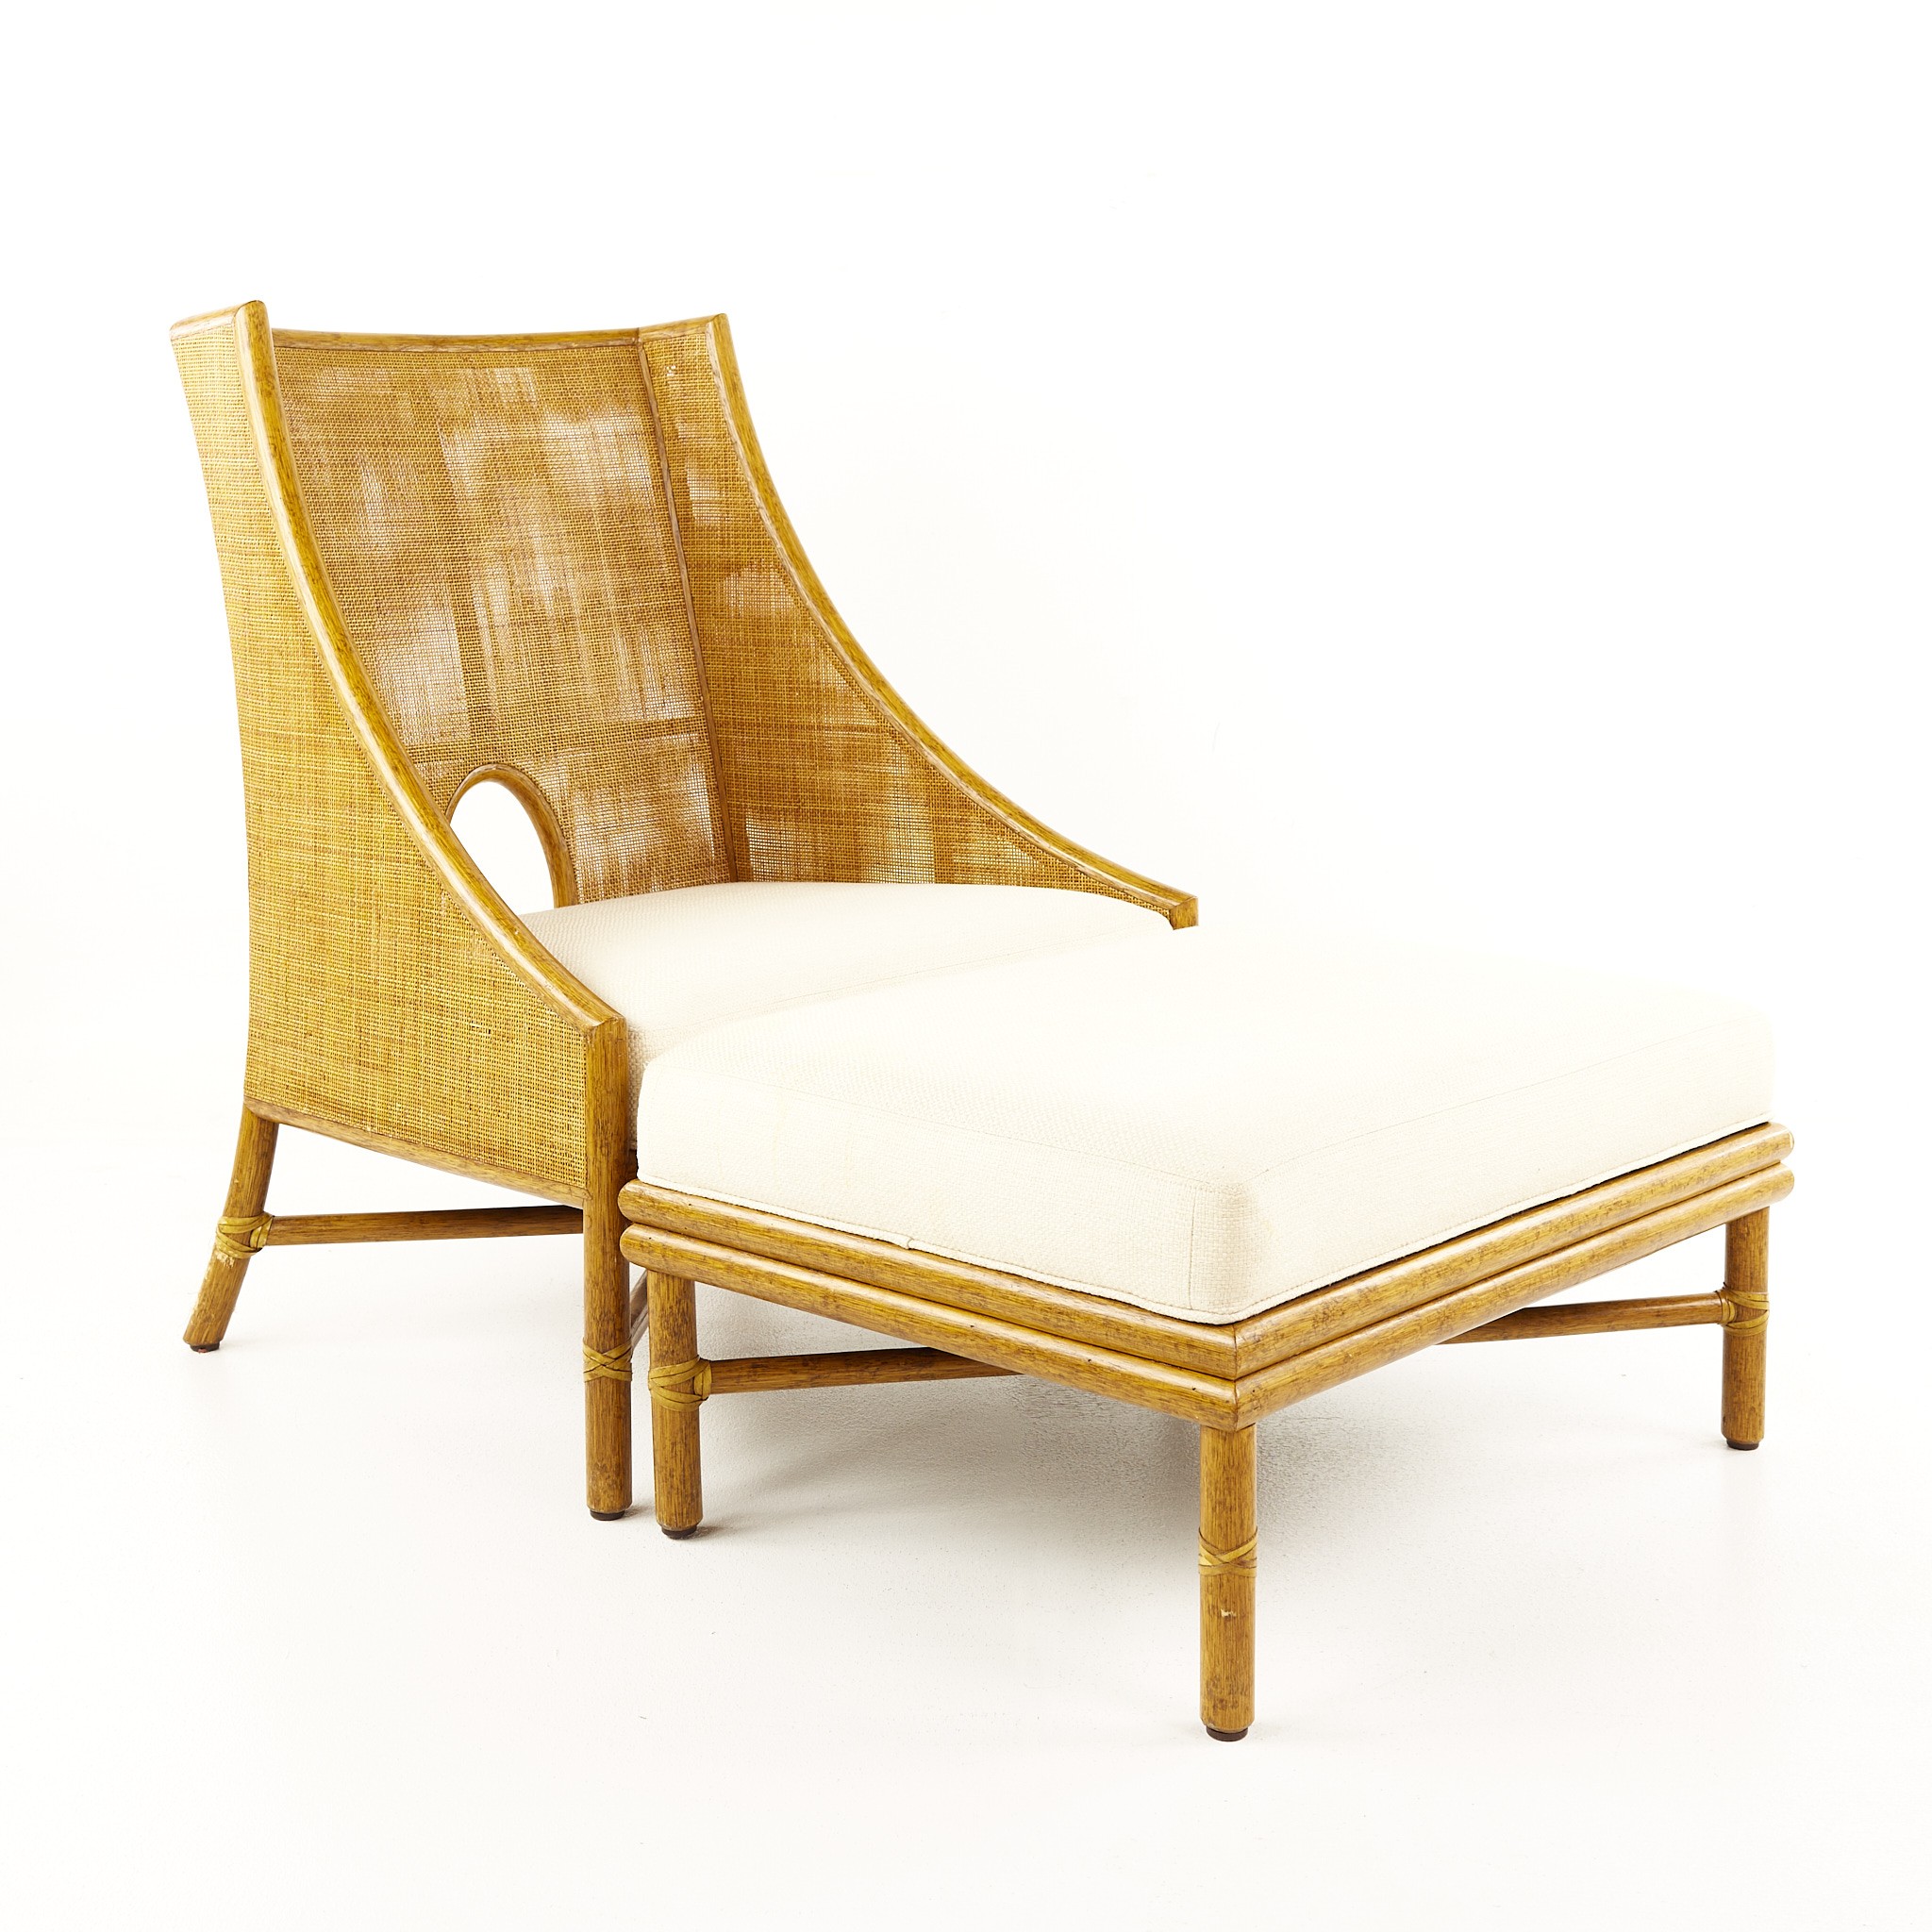 Barbara Barry for Mcguire Mid Century Bamboo Lounge Chair and Ottoman